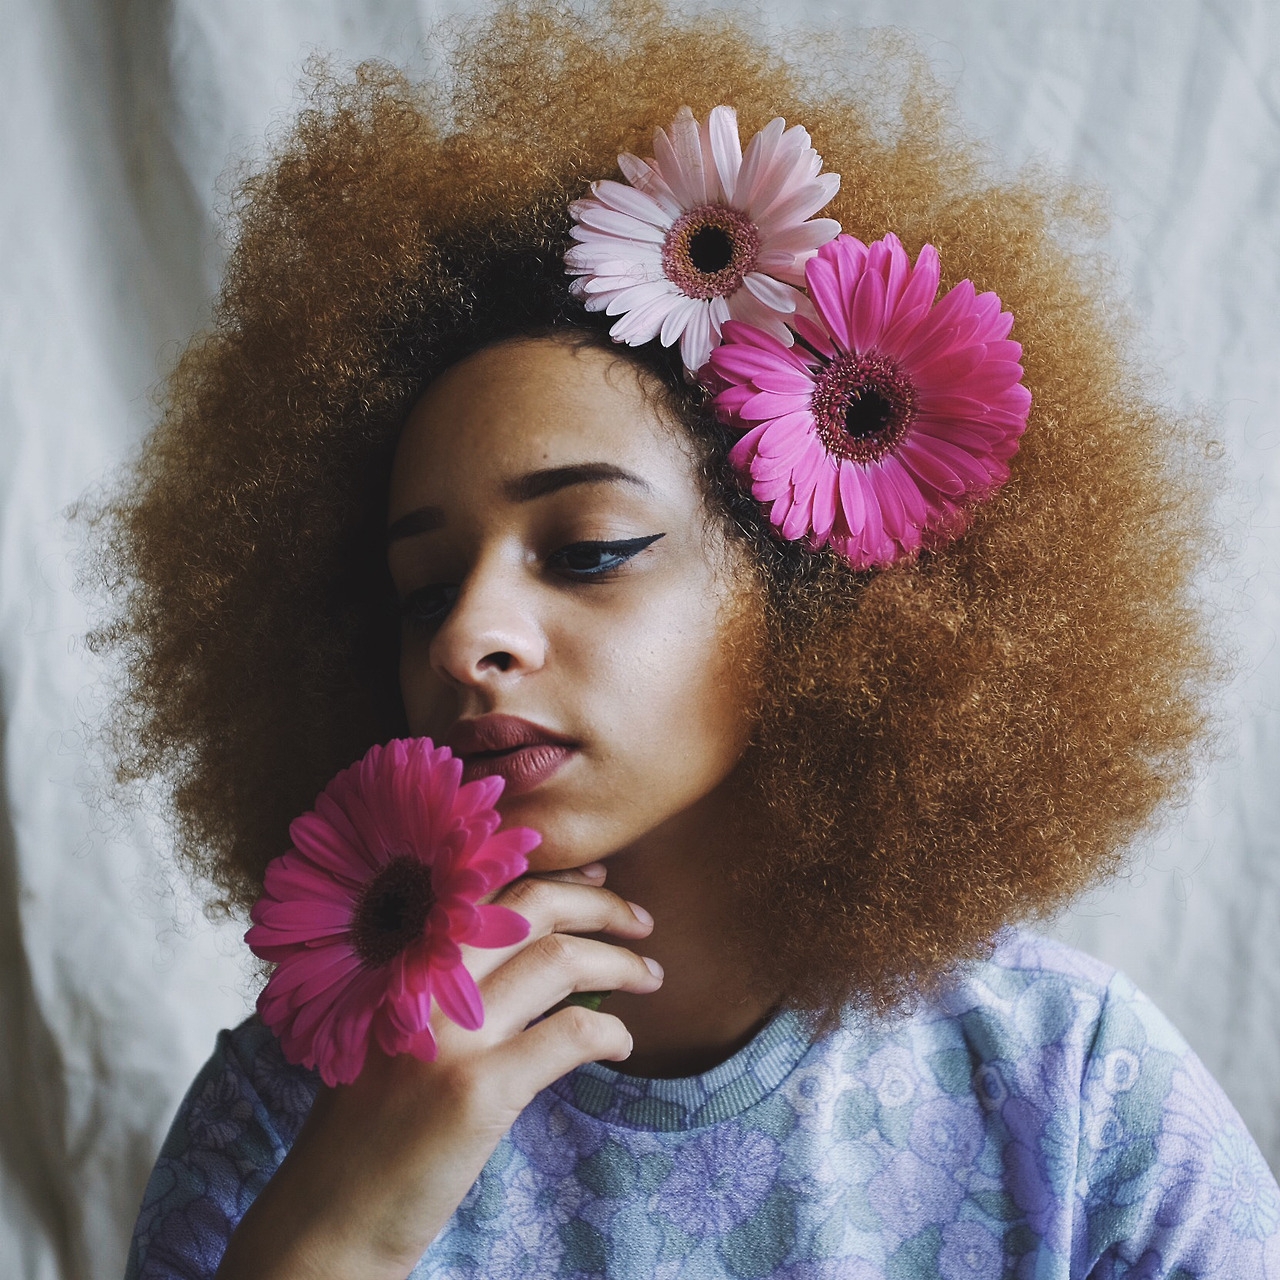 Woman Black Afro Natural Hair Flower Crown Beautiful Woman of Color